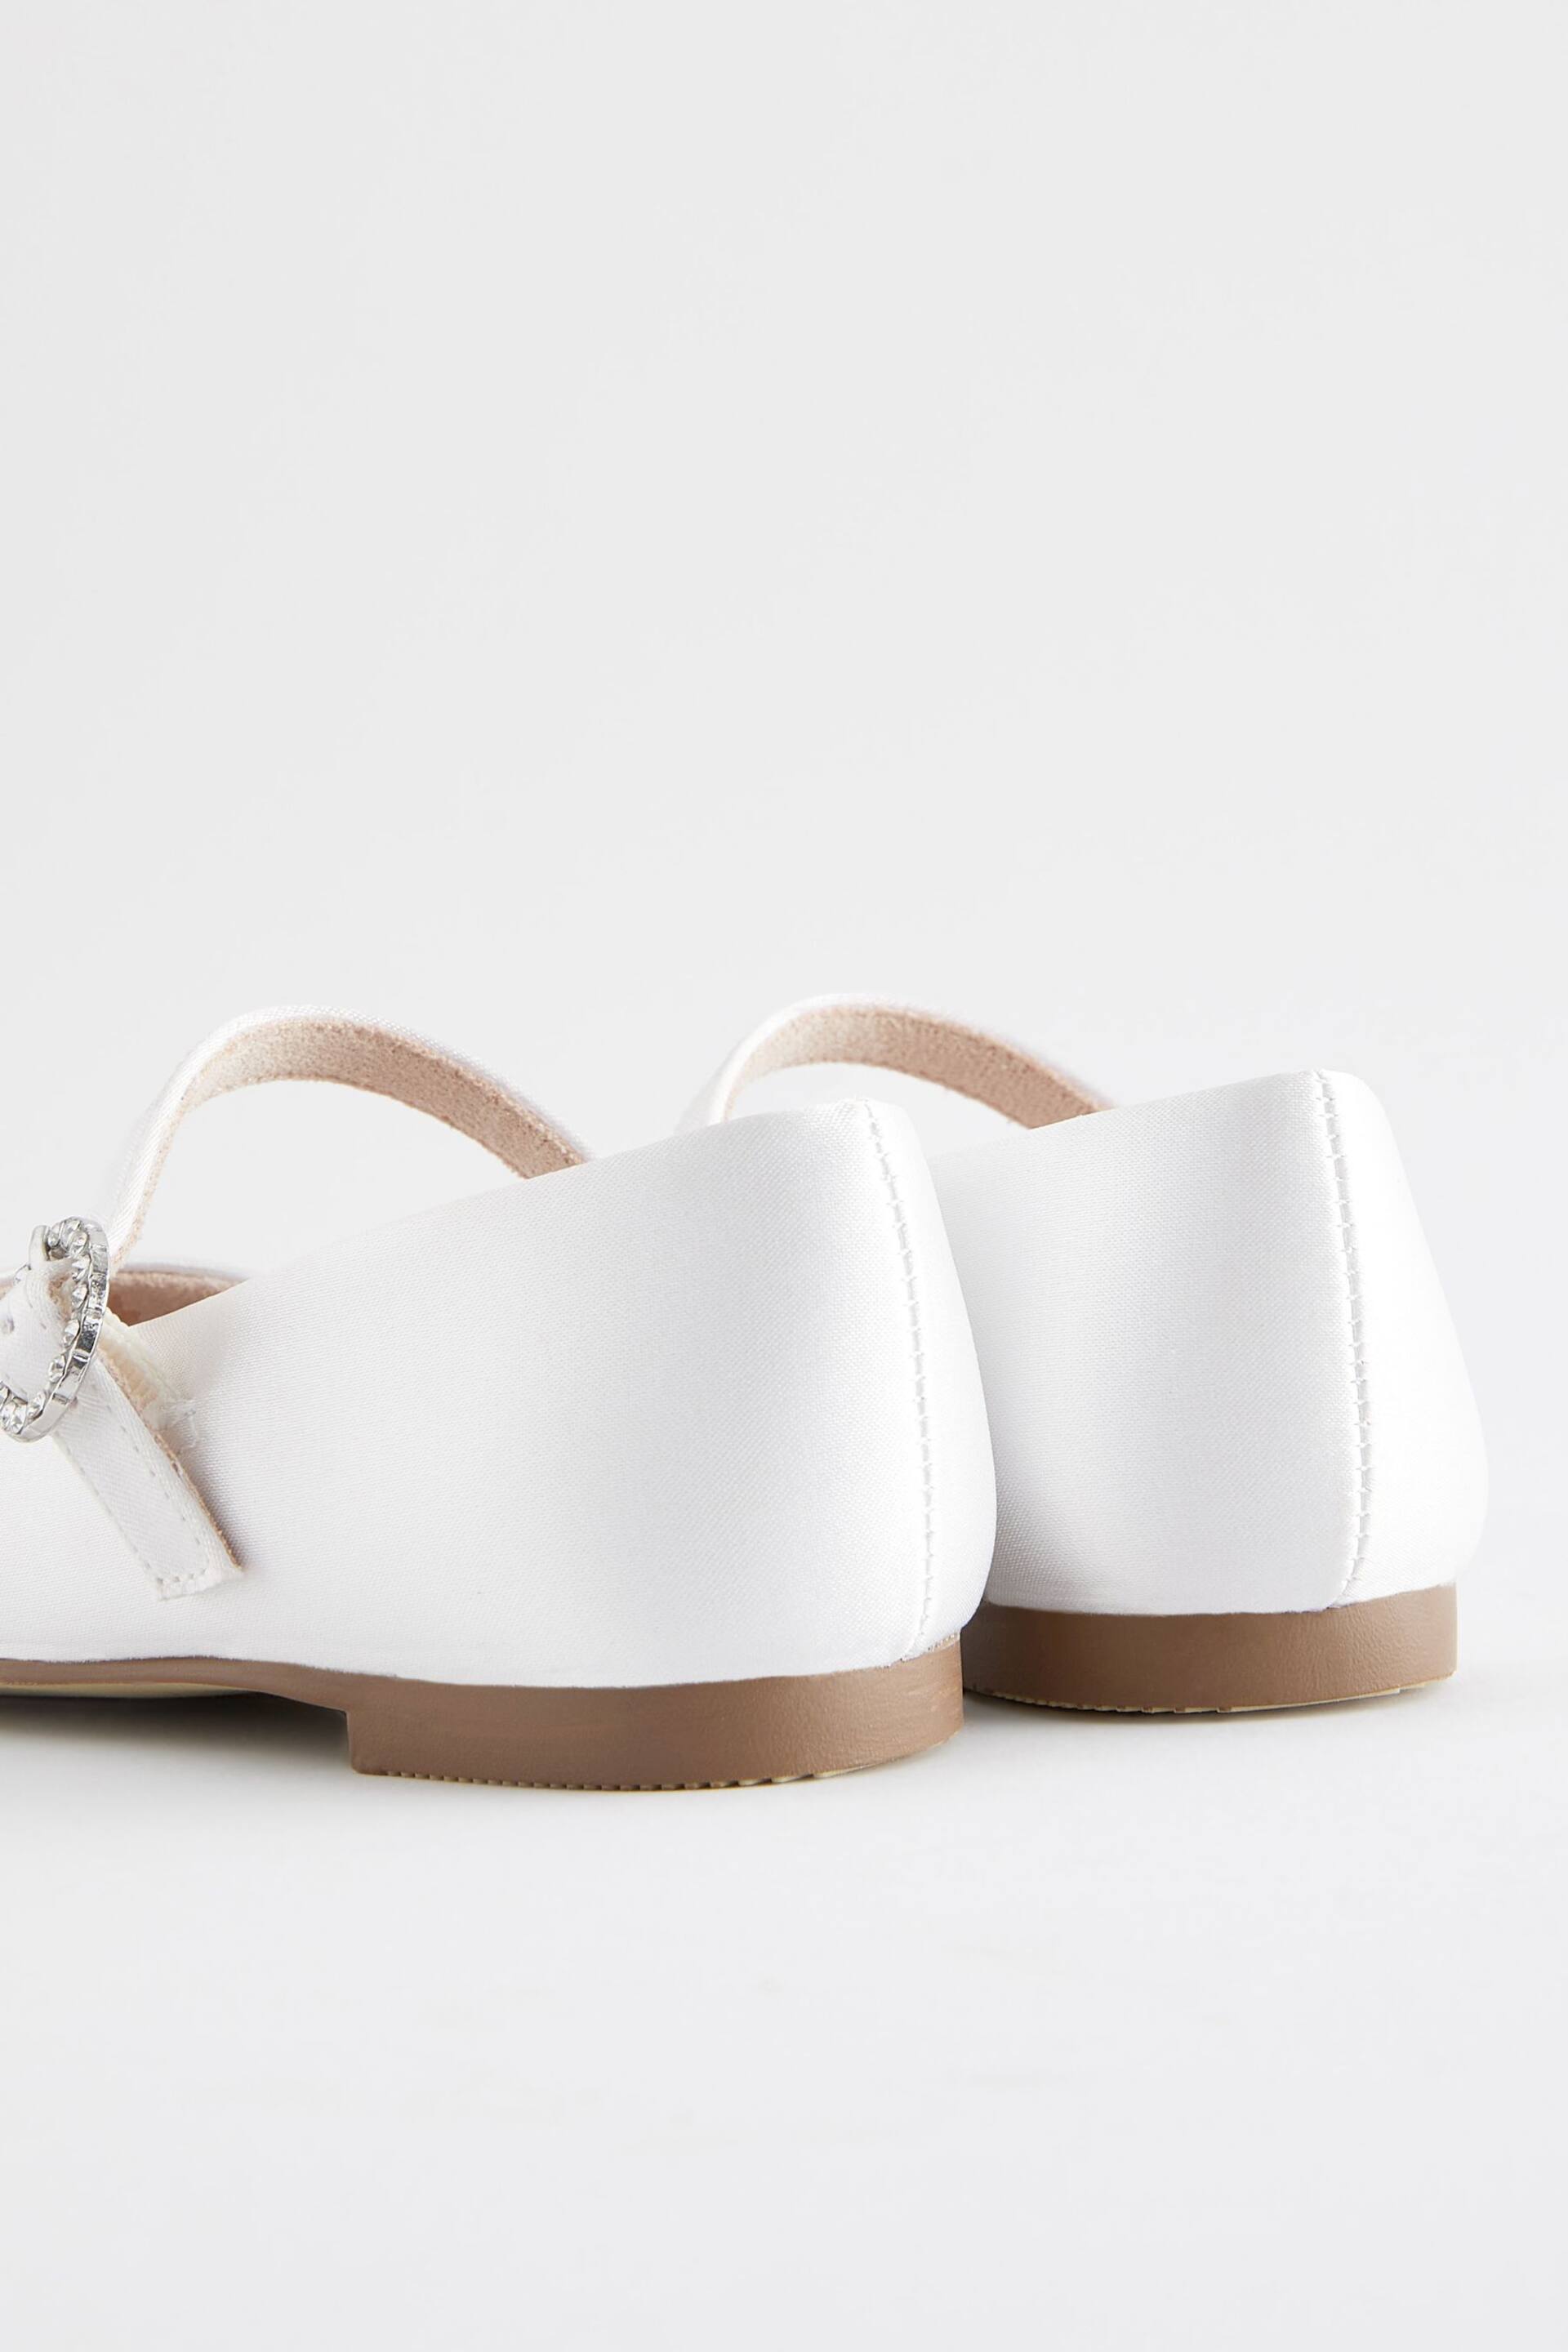 White Standard Fit (F) Bridesmaid Occasion Mary Jane Shoes - Image 3 of 5